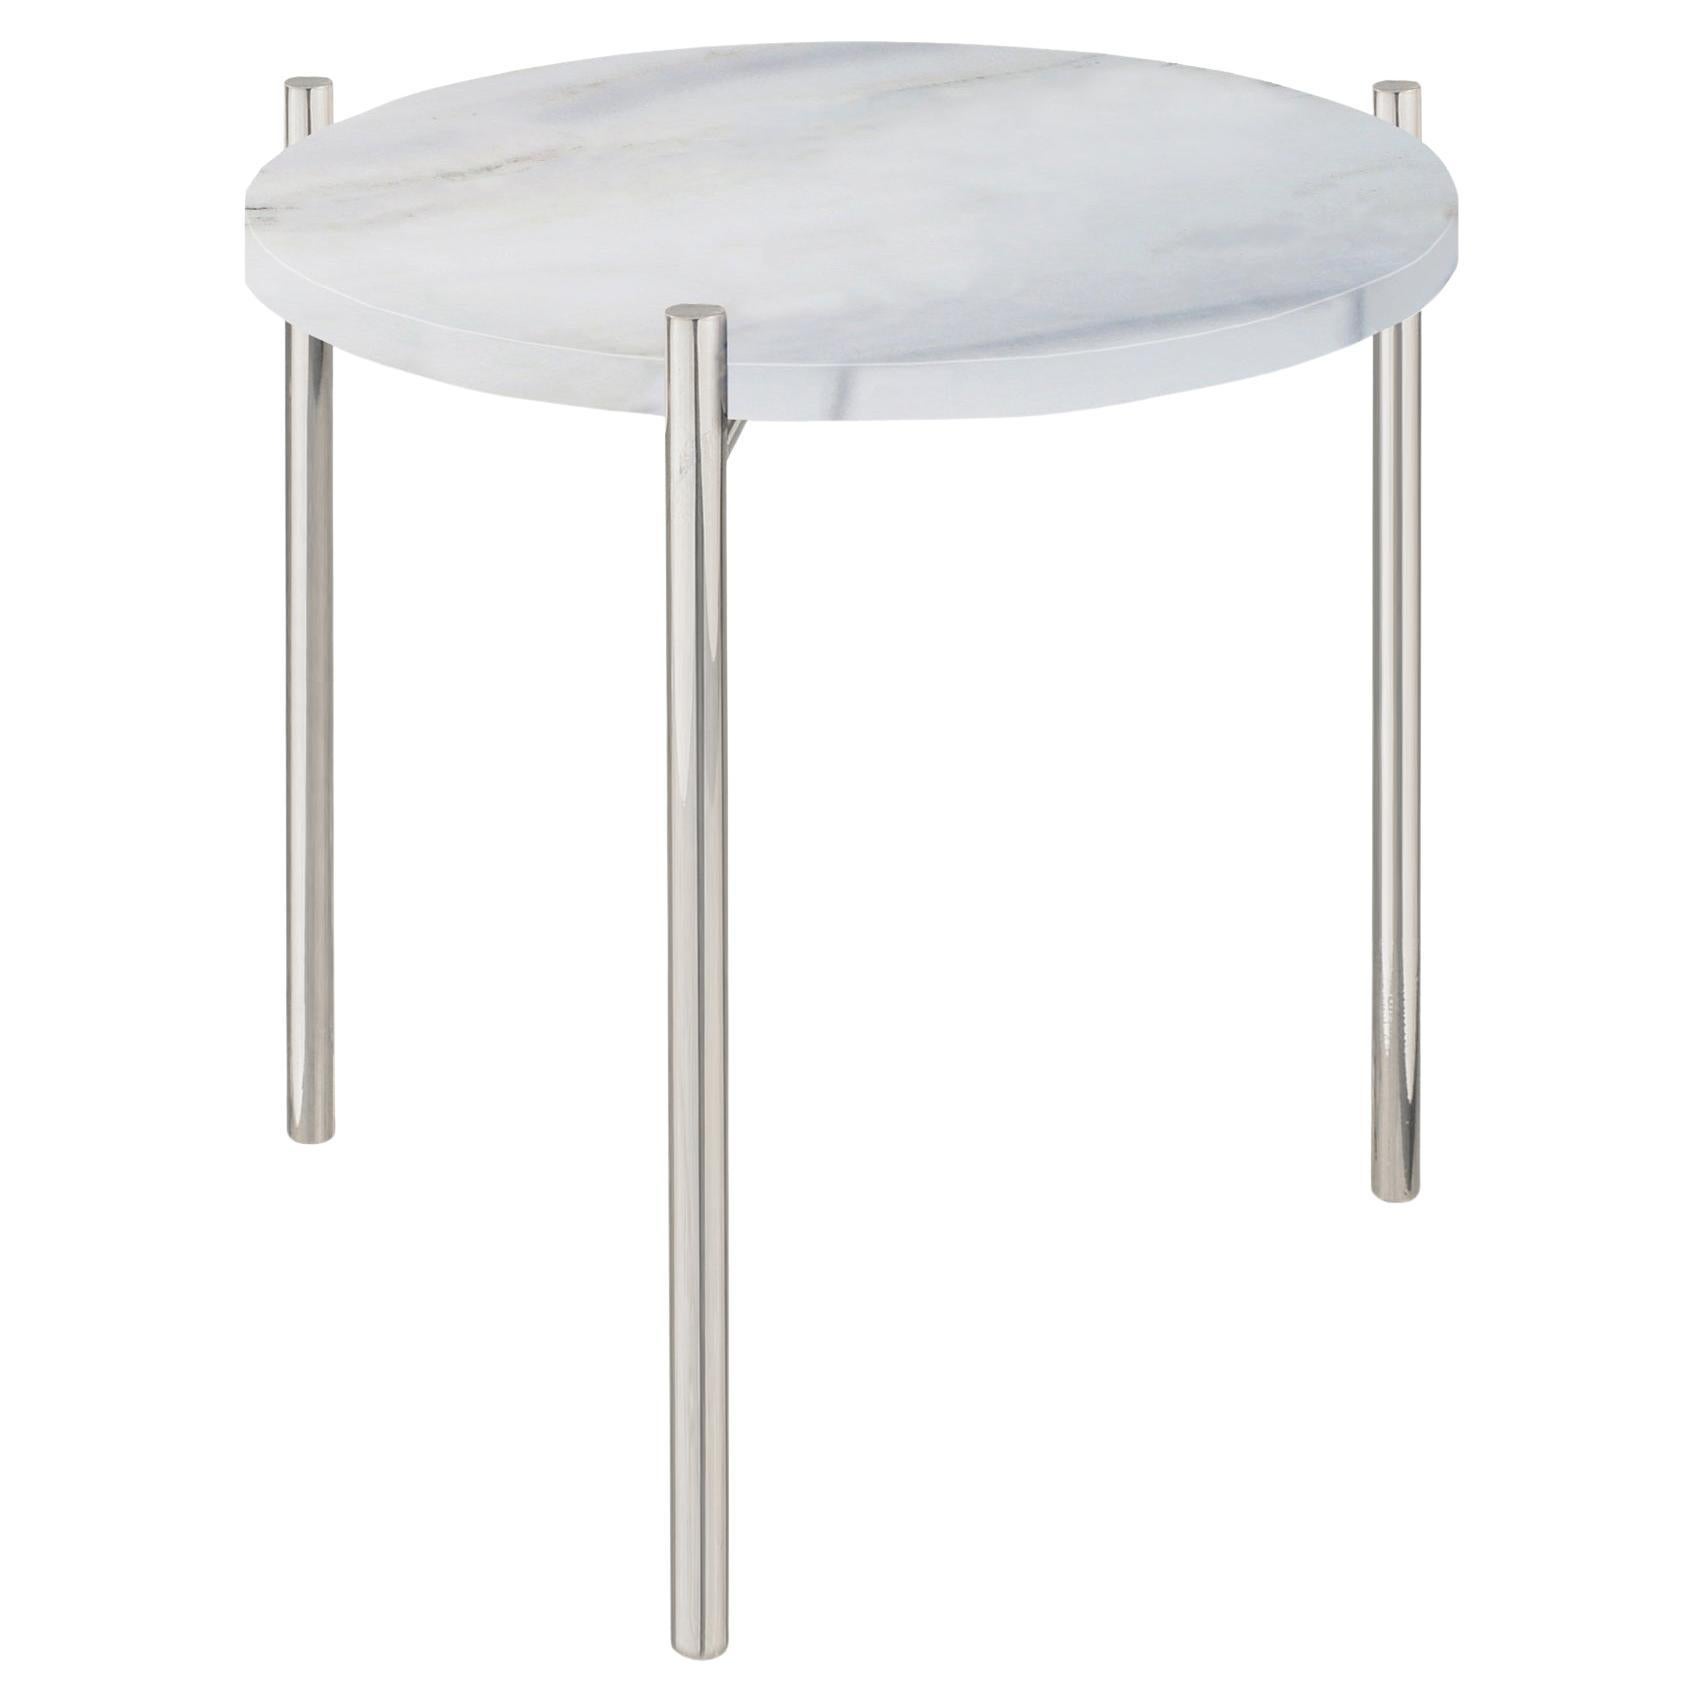 Pair of White Marble Stainless Steel Side Tables For Sale